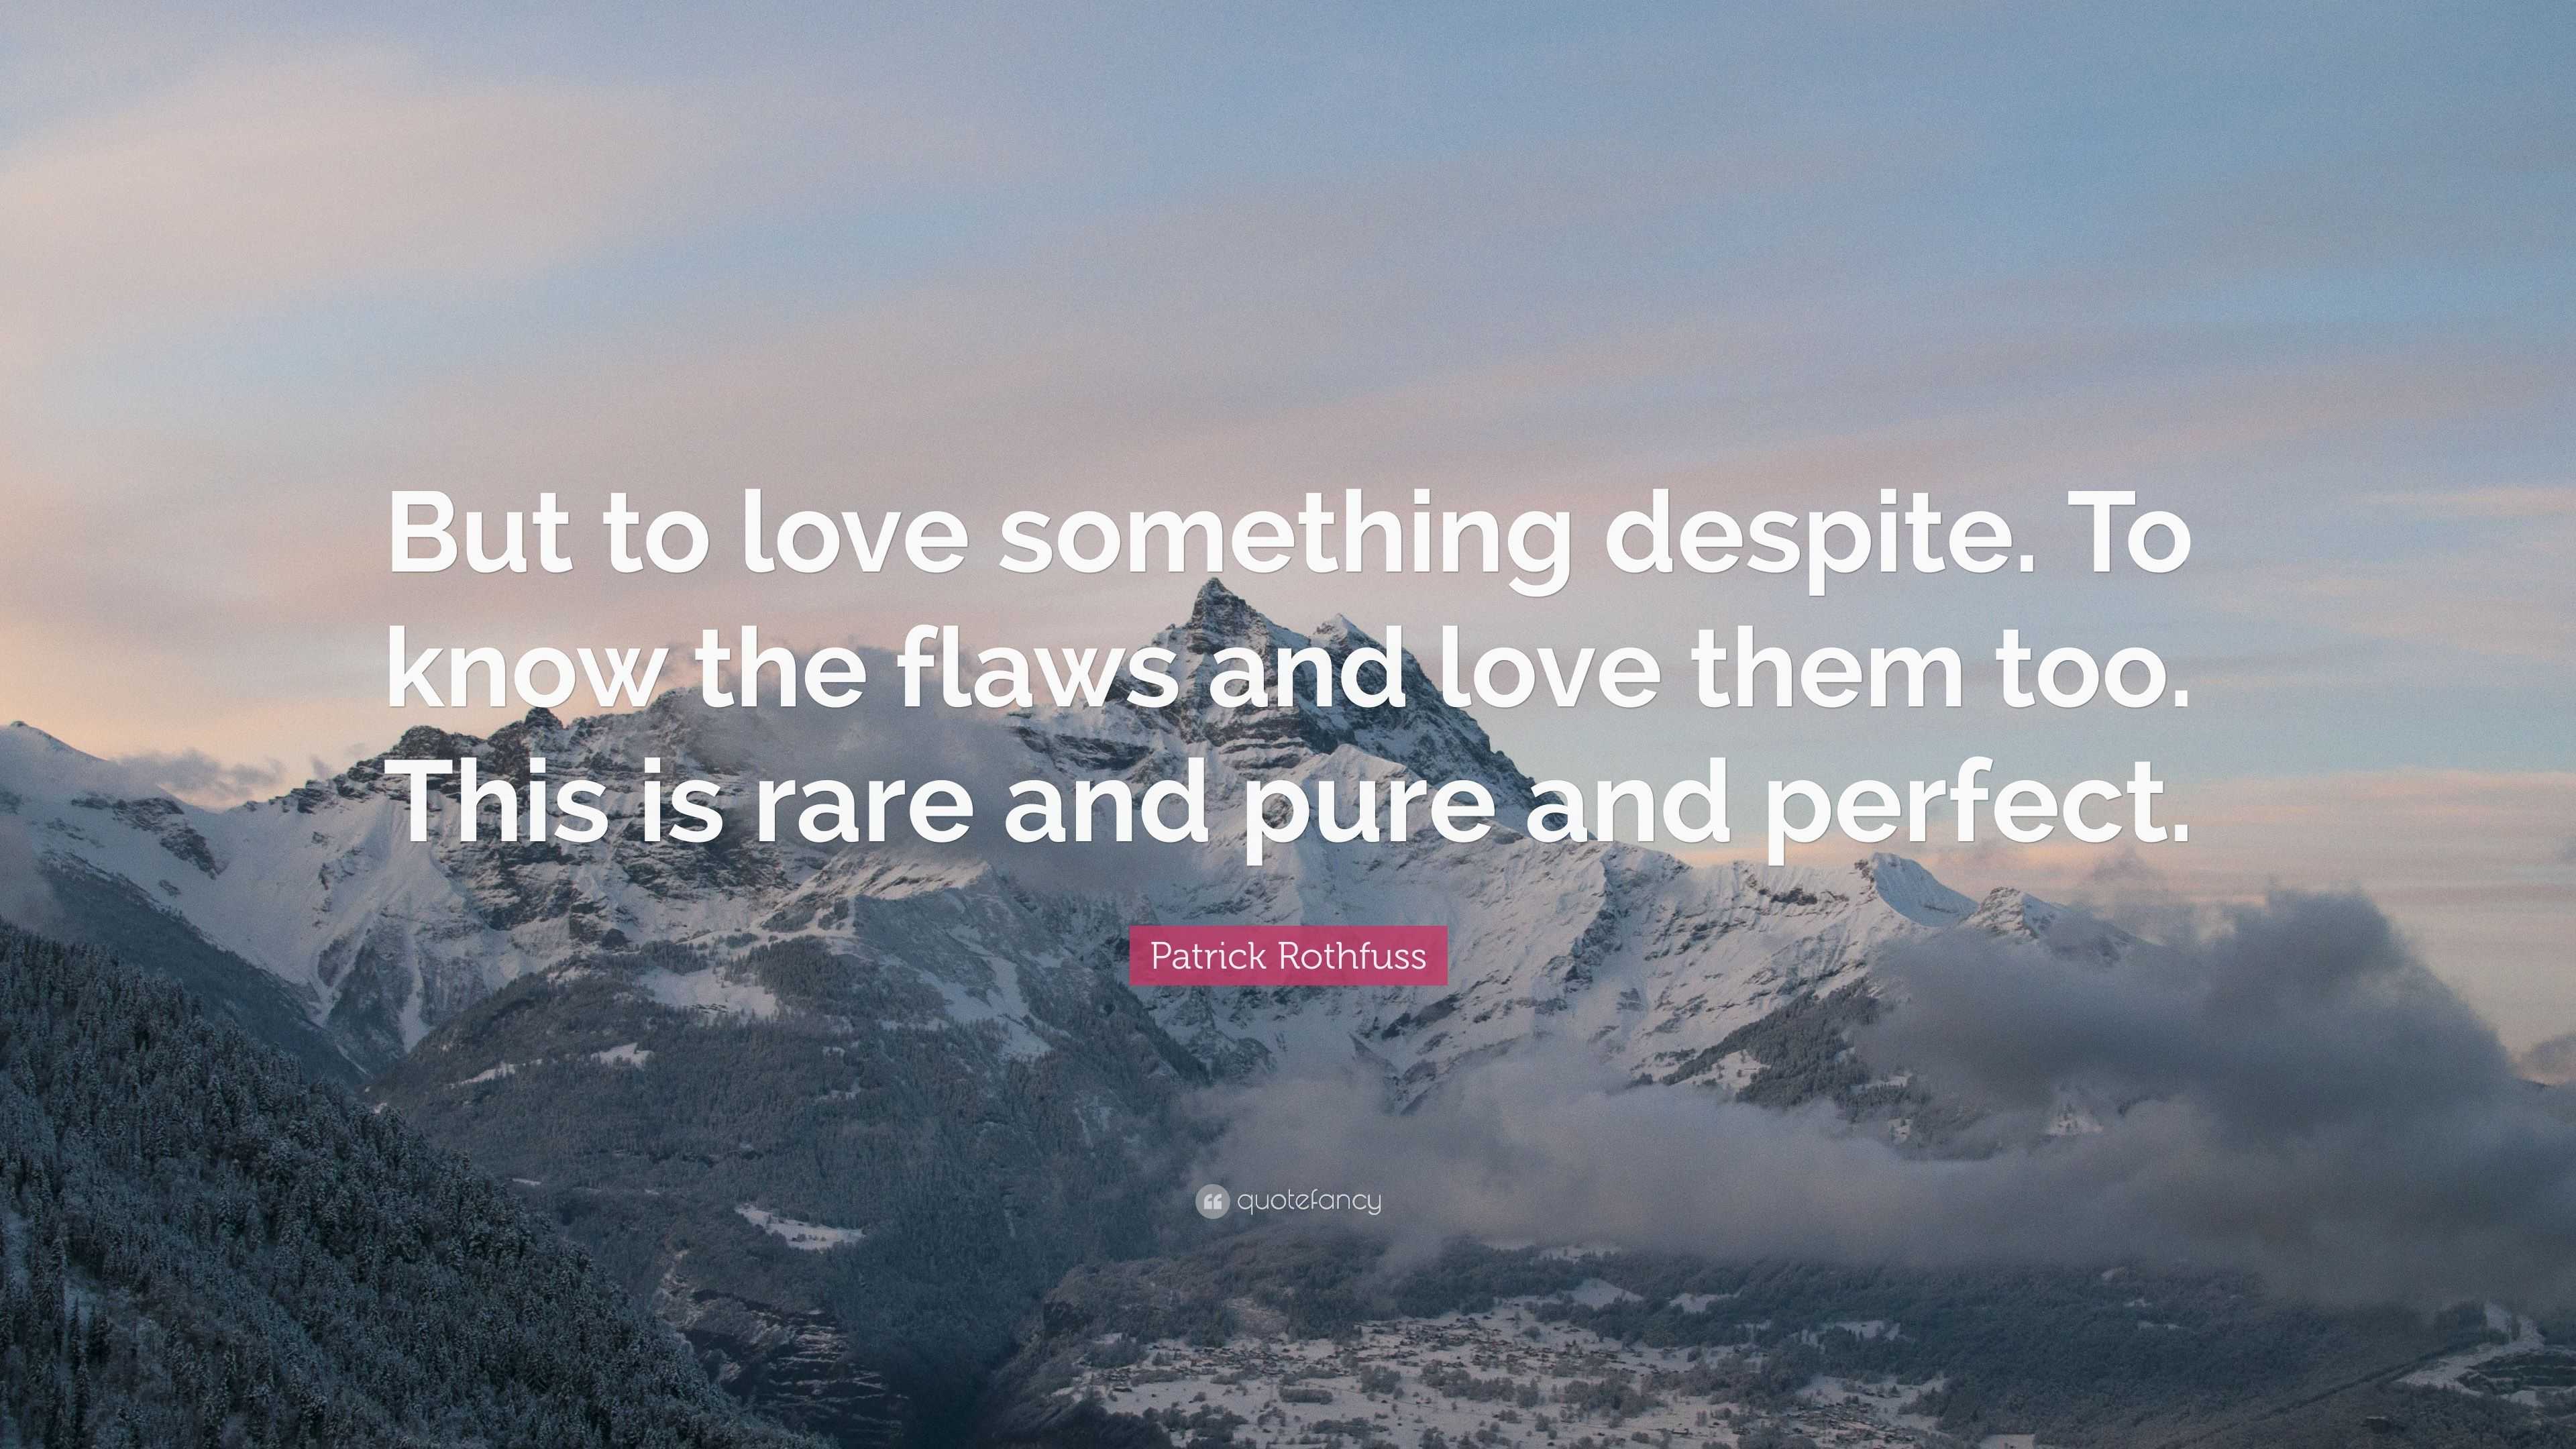 Patrick Rothfuss Quote: “But to love something despite. To know the ...